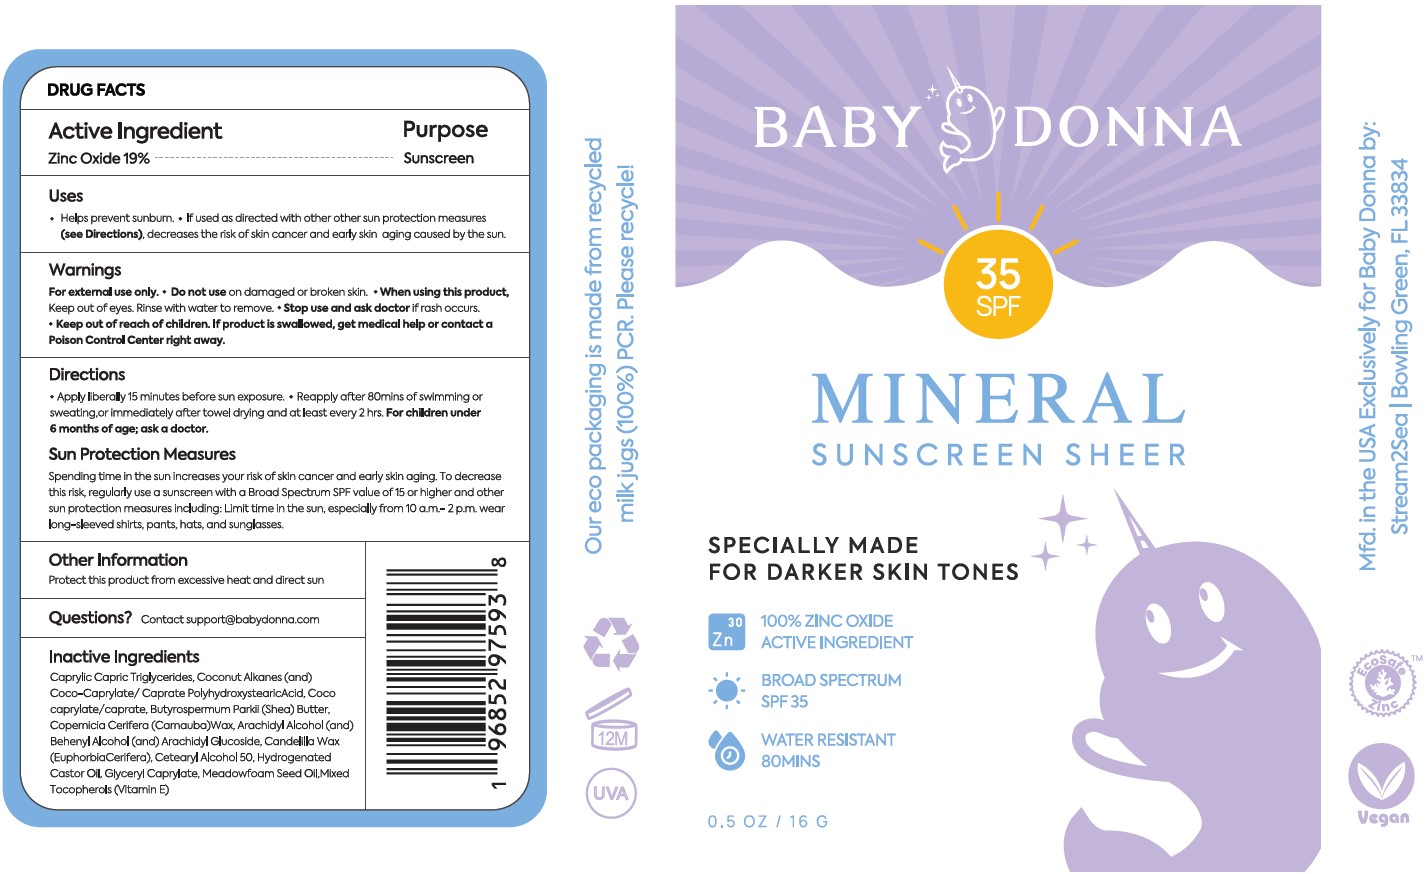 Baby Donna Mineral Sunscreen Sheer 35 SPF